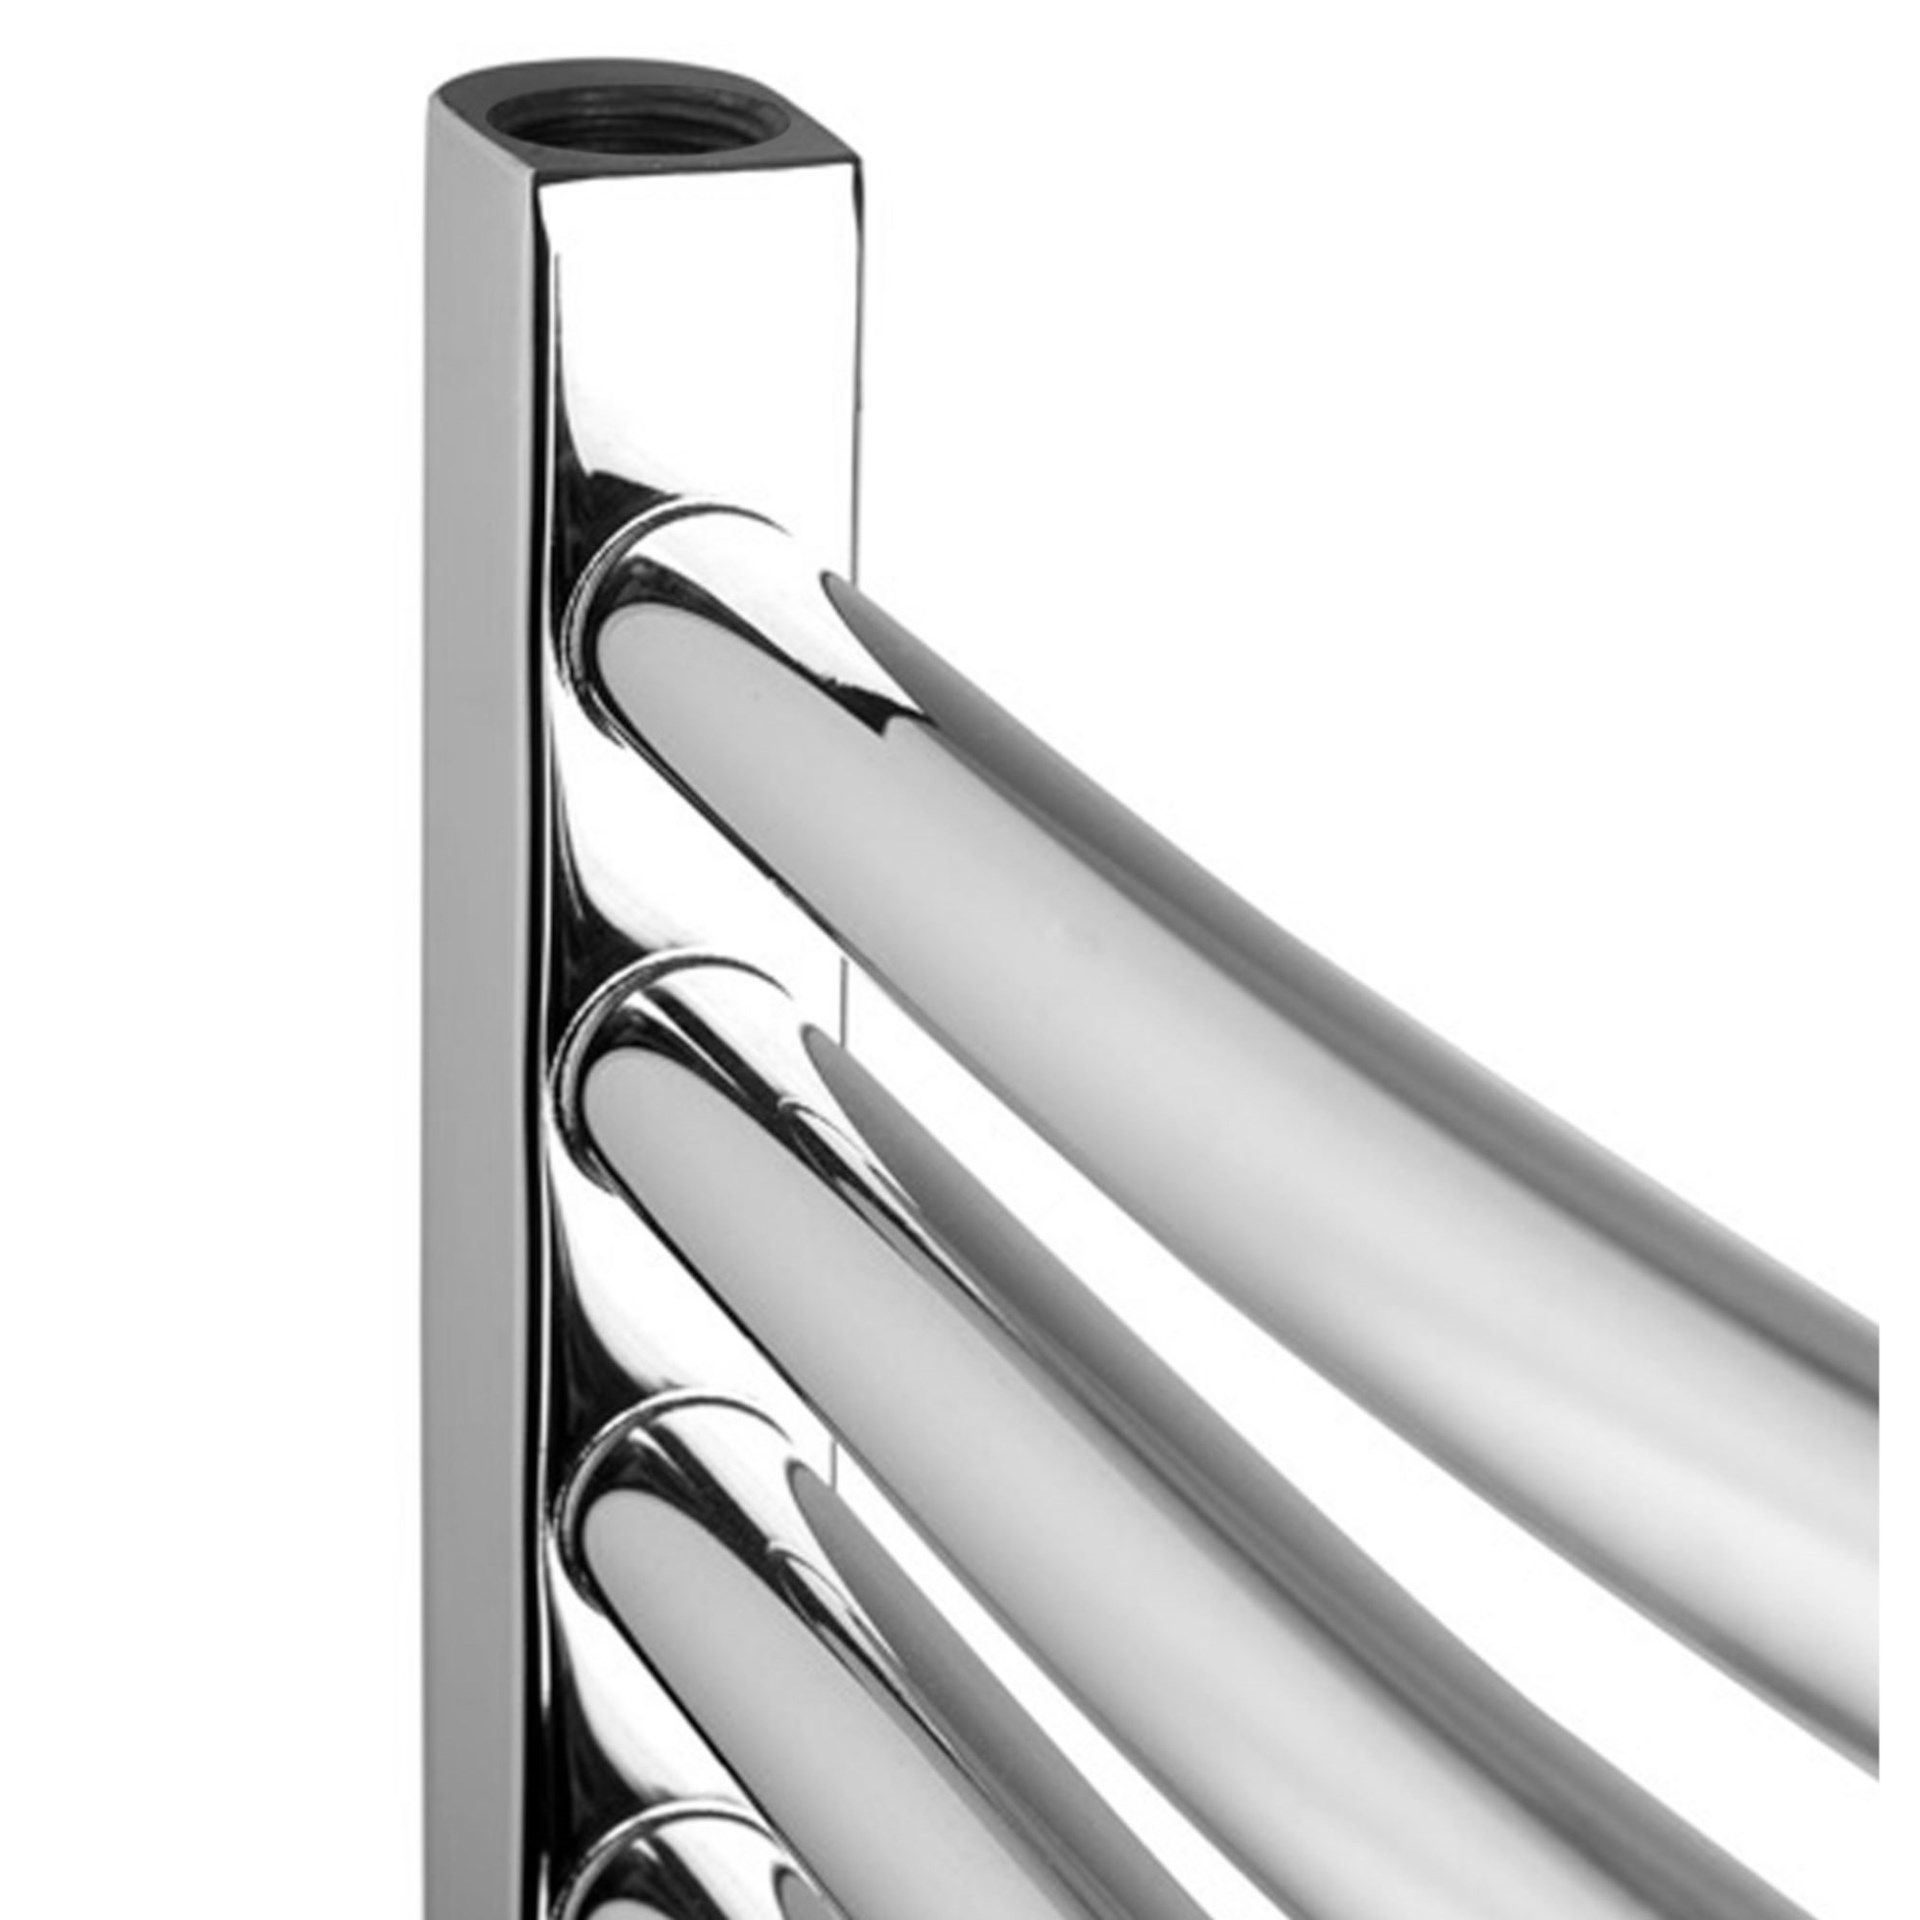 Brand New 1200x600mm - 20mm Tubes - Chrome Curved Rail Ladder Towel Radiator.NC1200600.Made from chr - Image 3 of 3